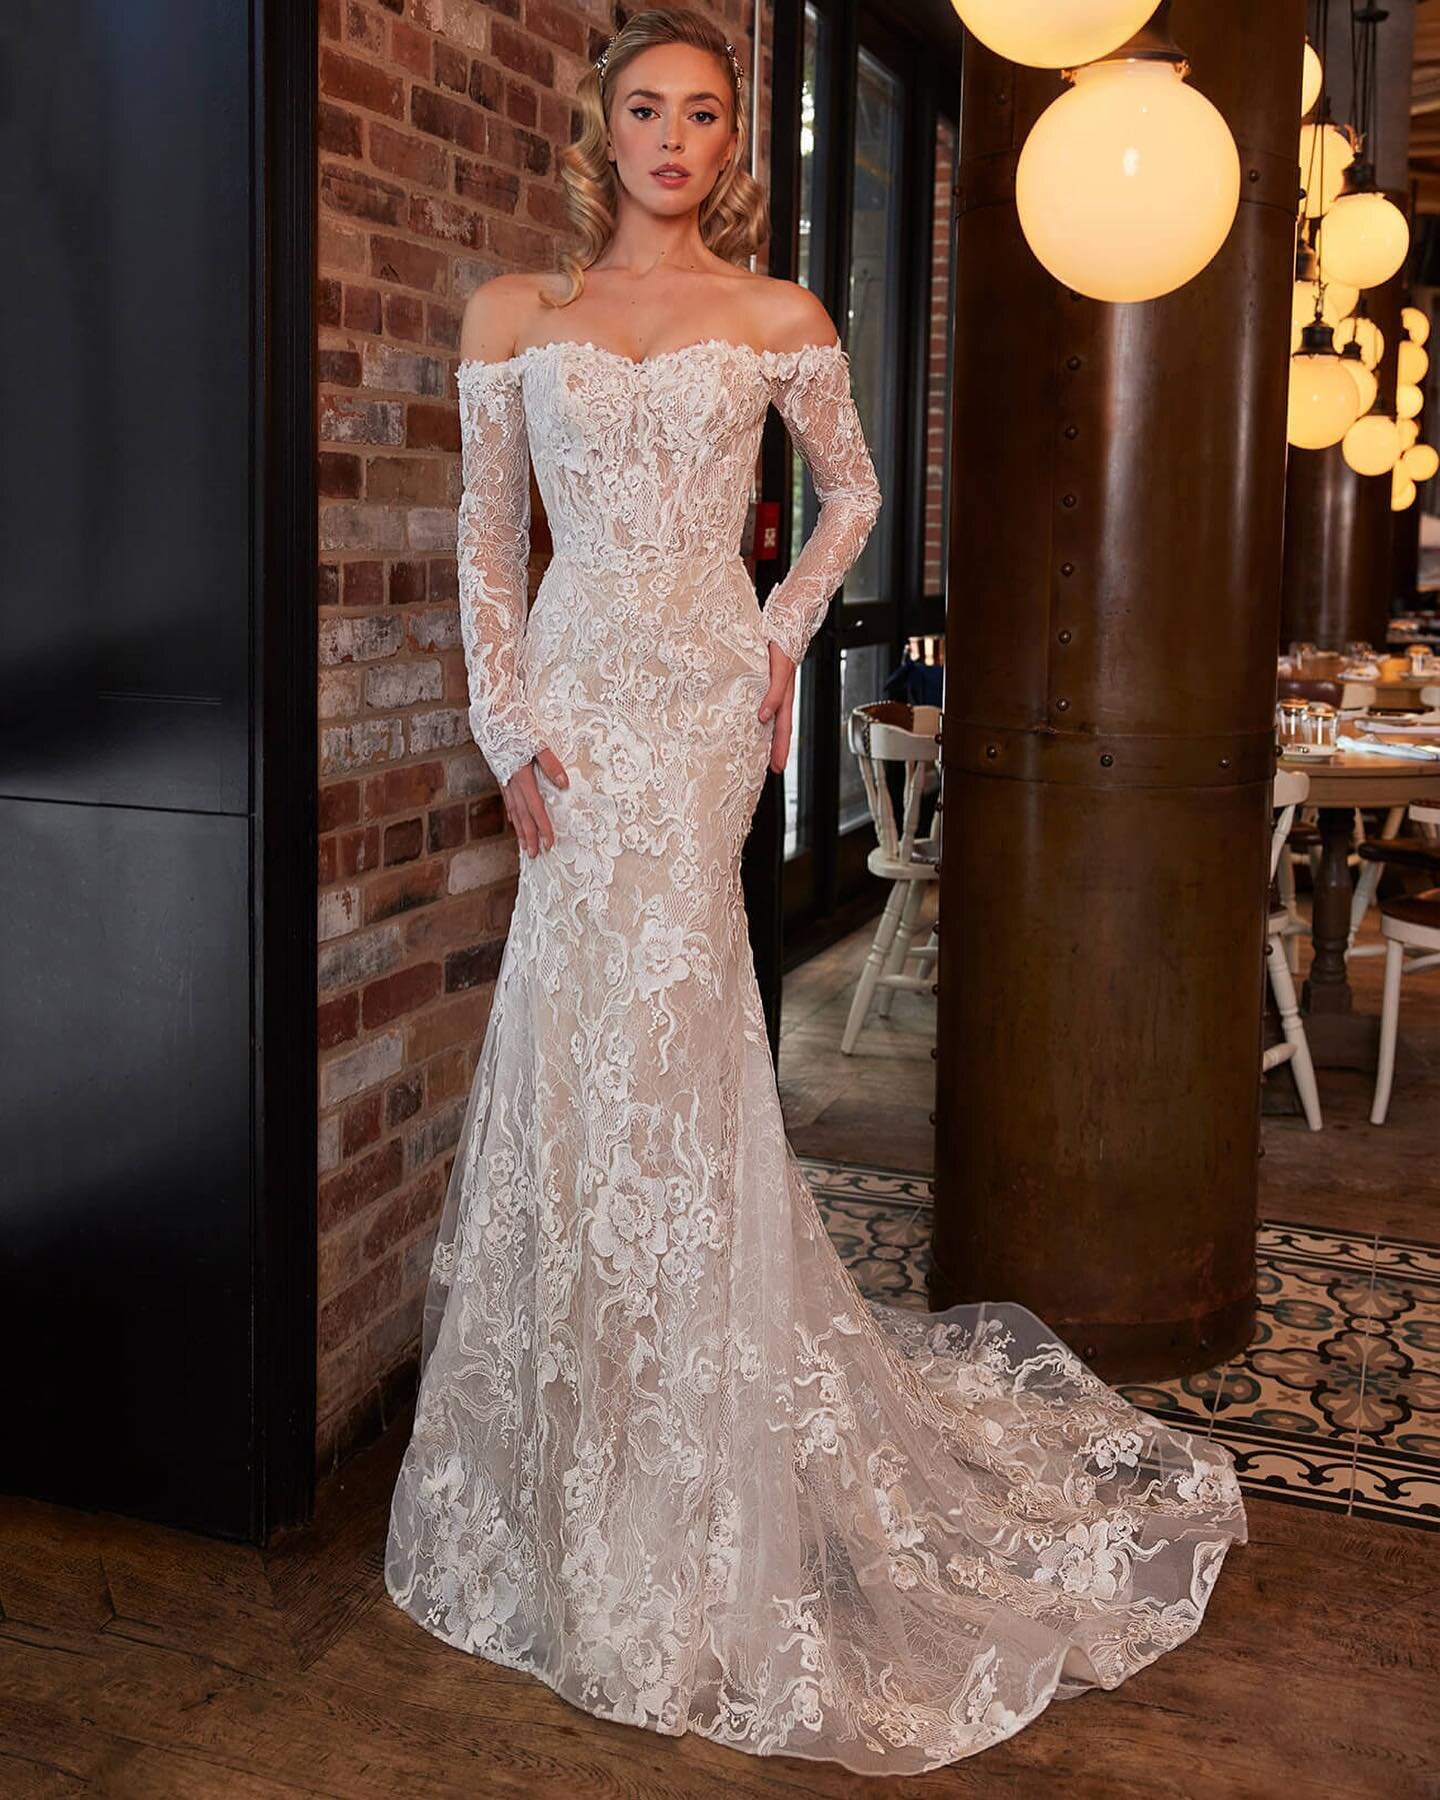 ✨L A U R E N A ✨

New New New! So many new @callablanchedress arrivals 🤩🙌🏼🙌🏼🙌🏼

Brides - this dress is 🔥 
Wanting to make a statement? You have to try this gown on!!!!! 
It&rsquo;s another busy Saturday - so we will be posting try on pictures